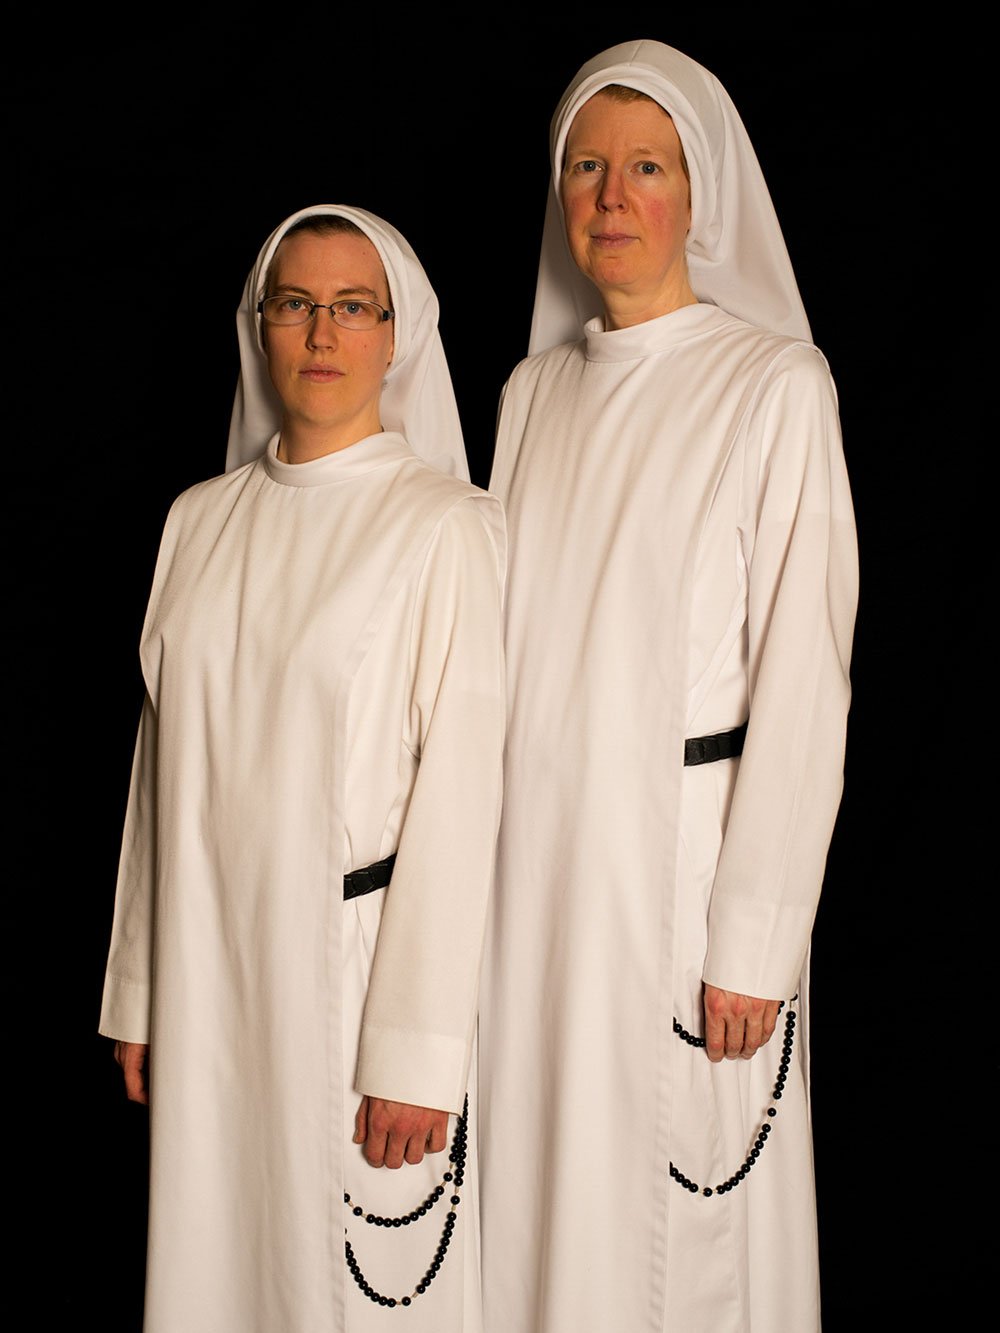 Sister Diana Marie (left), 32, and Sister Maria Kolbe, 42. Having been with the order for just three years, they are considered novices.